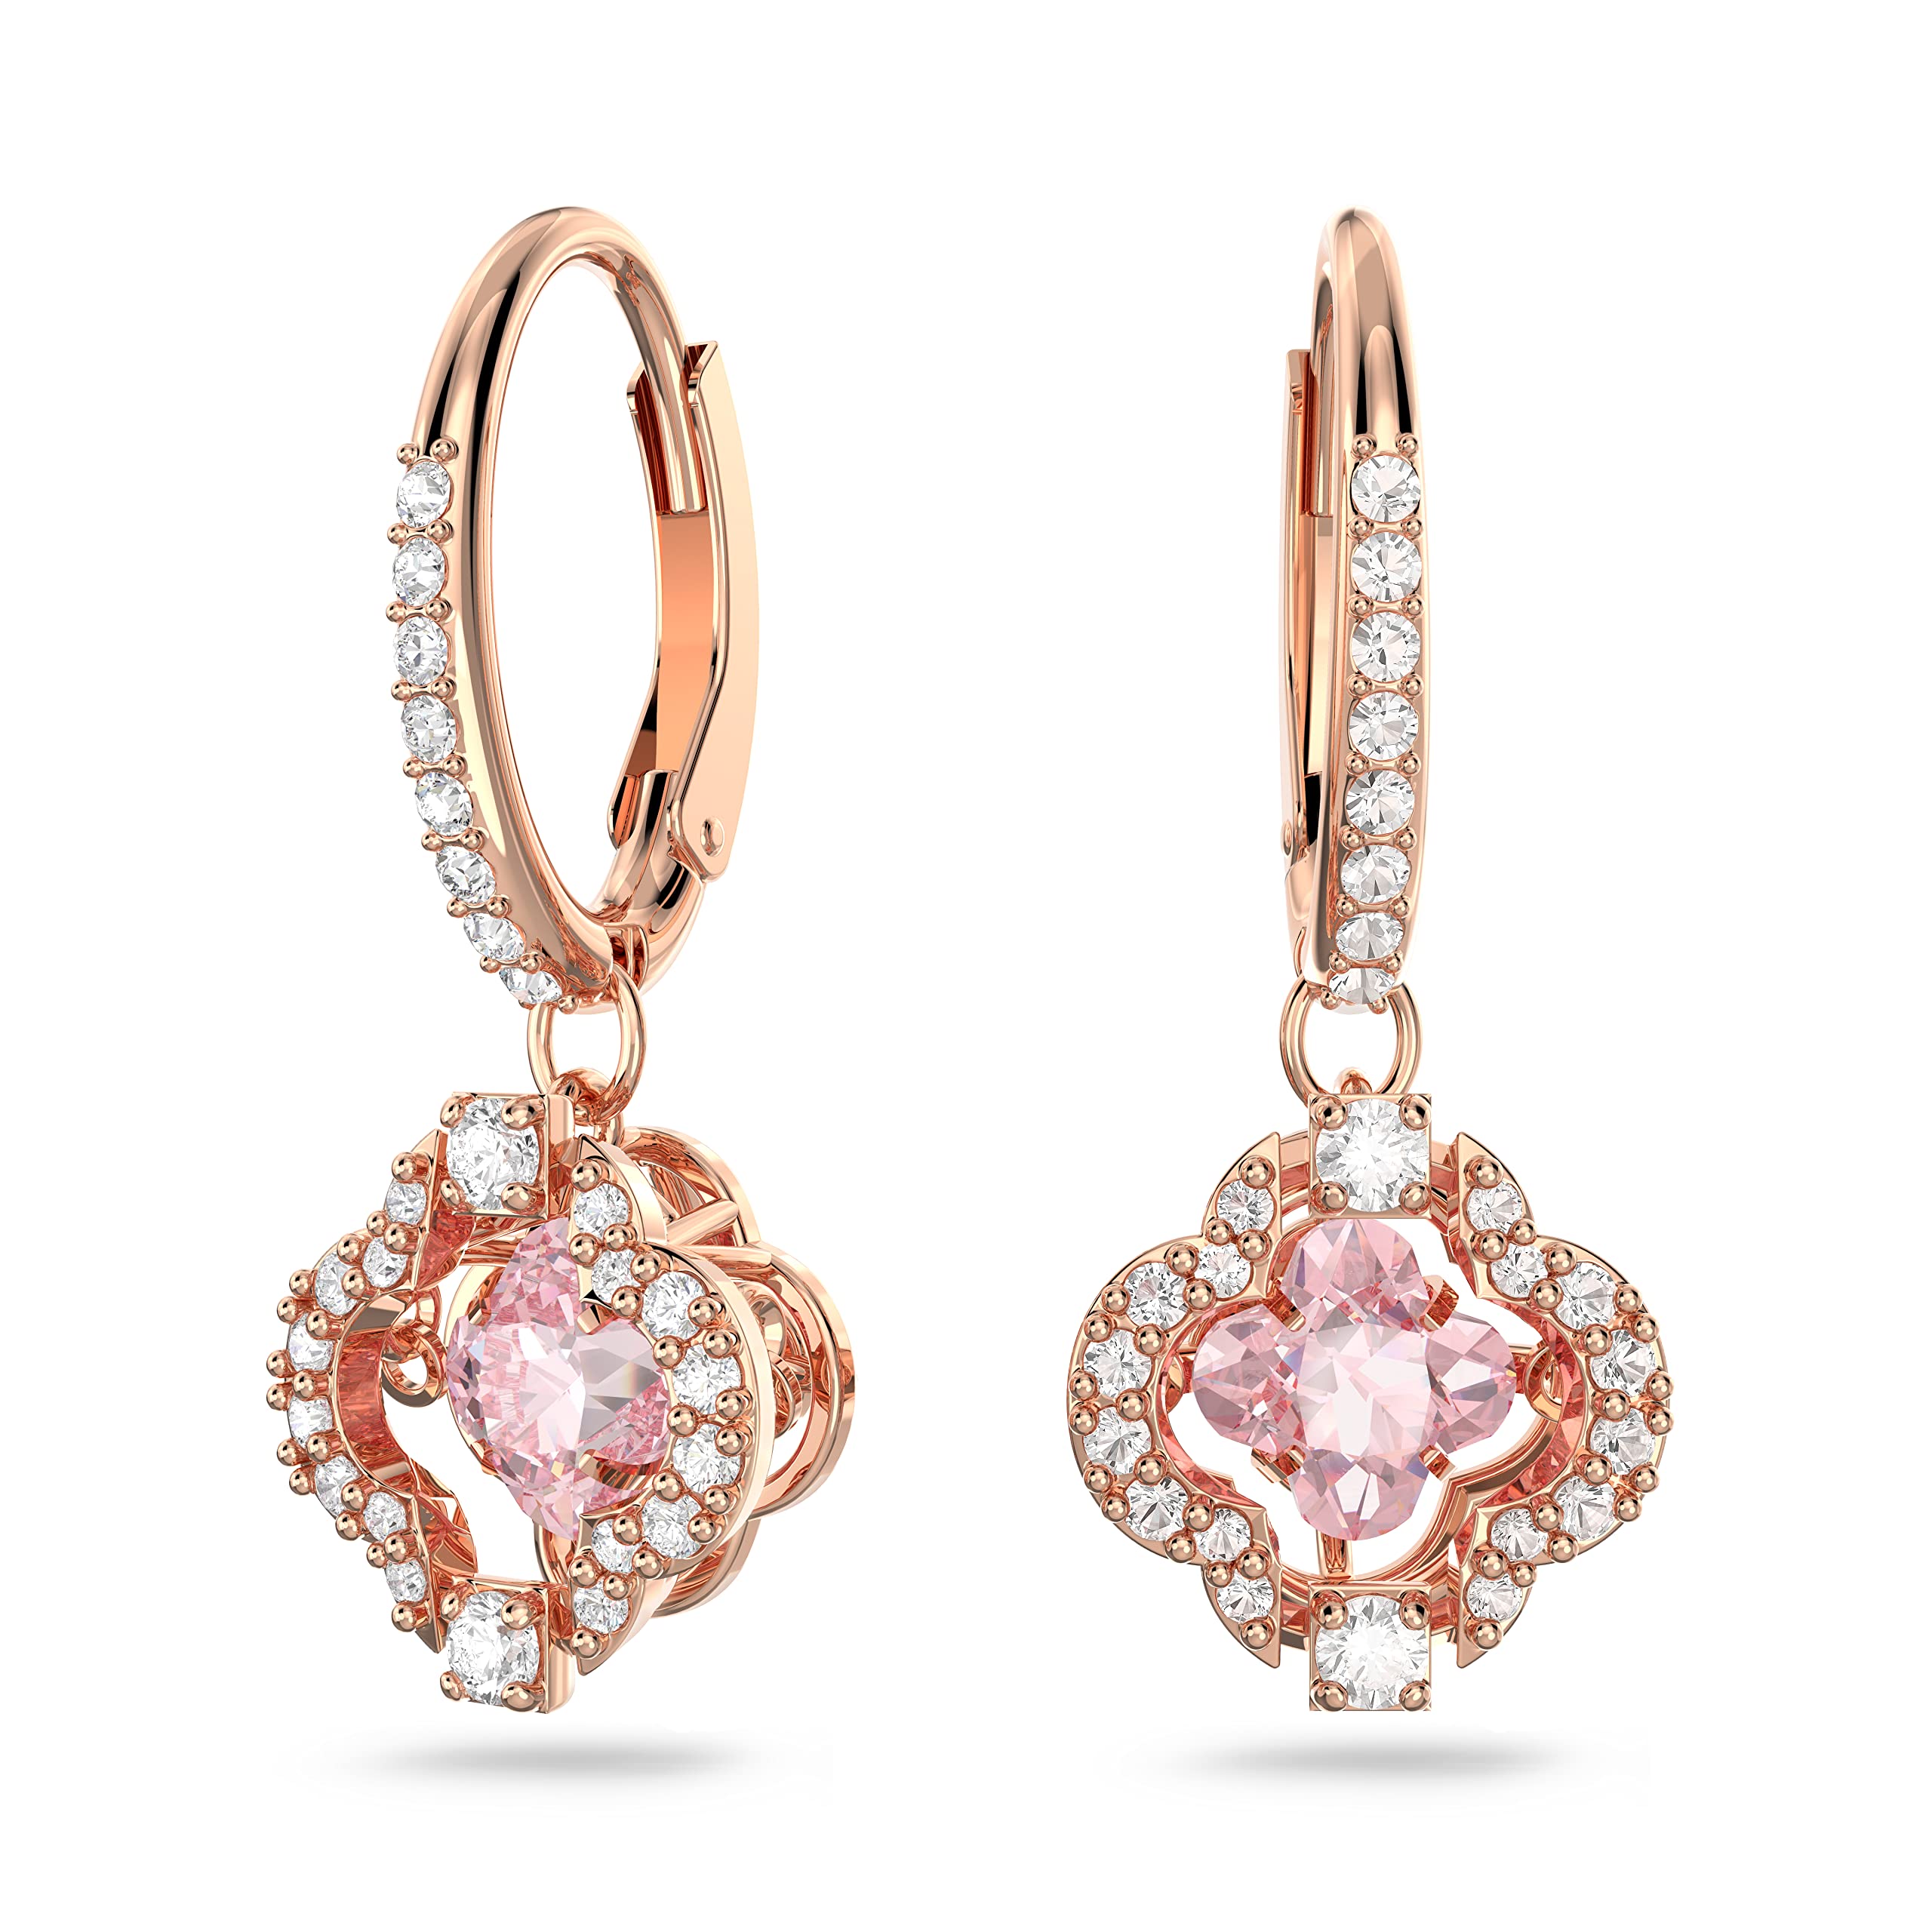 Swarovski Sparkling Dance clover Pierced Earrings with clear crystal PavA Surrounding a Pink Stone on a Rose-gold Tone Plated Se